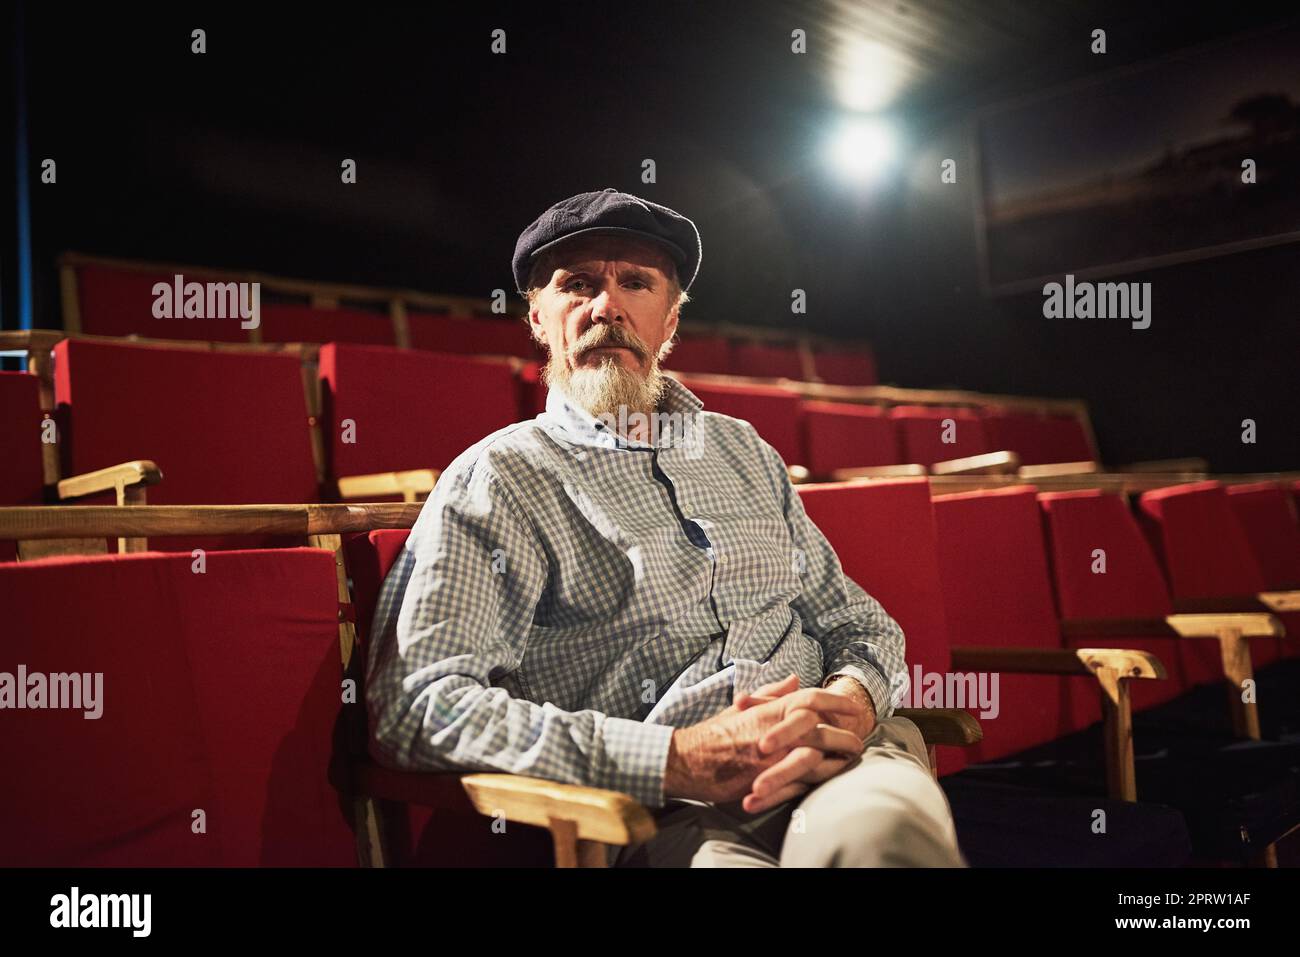 Hes a seasoned cinephile. Portrait of a confident senior man sitting alone in an empty movie theatre Stock Photo